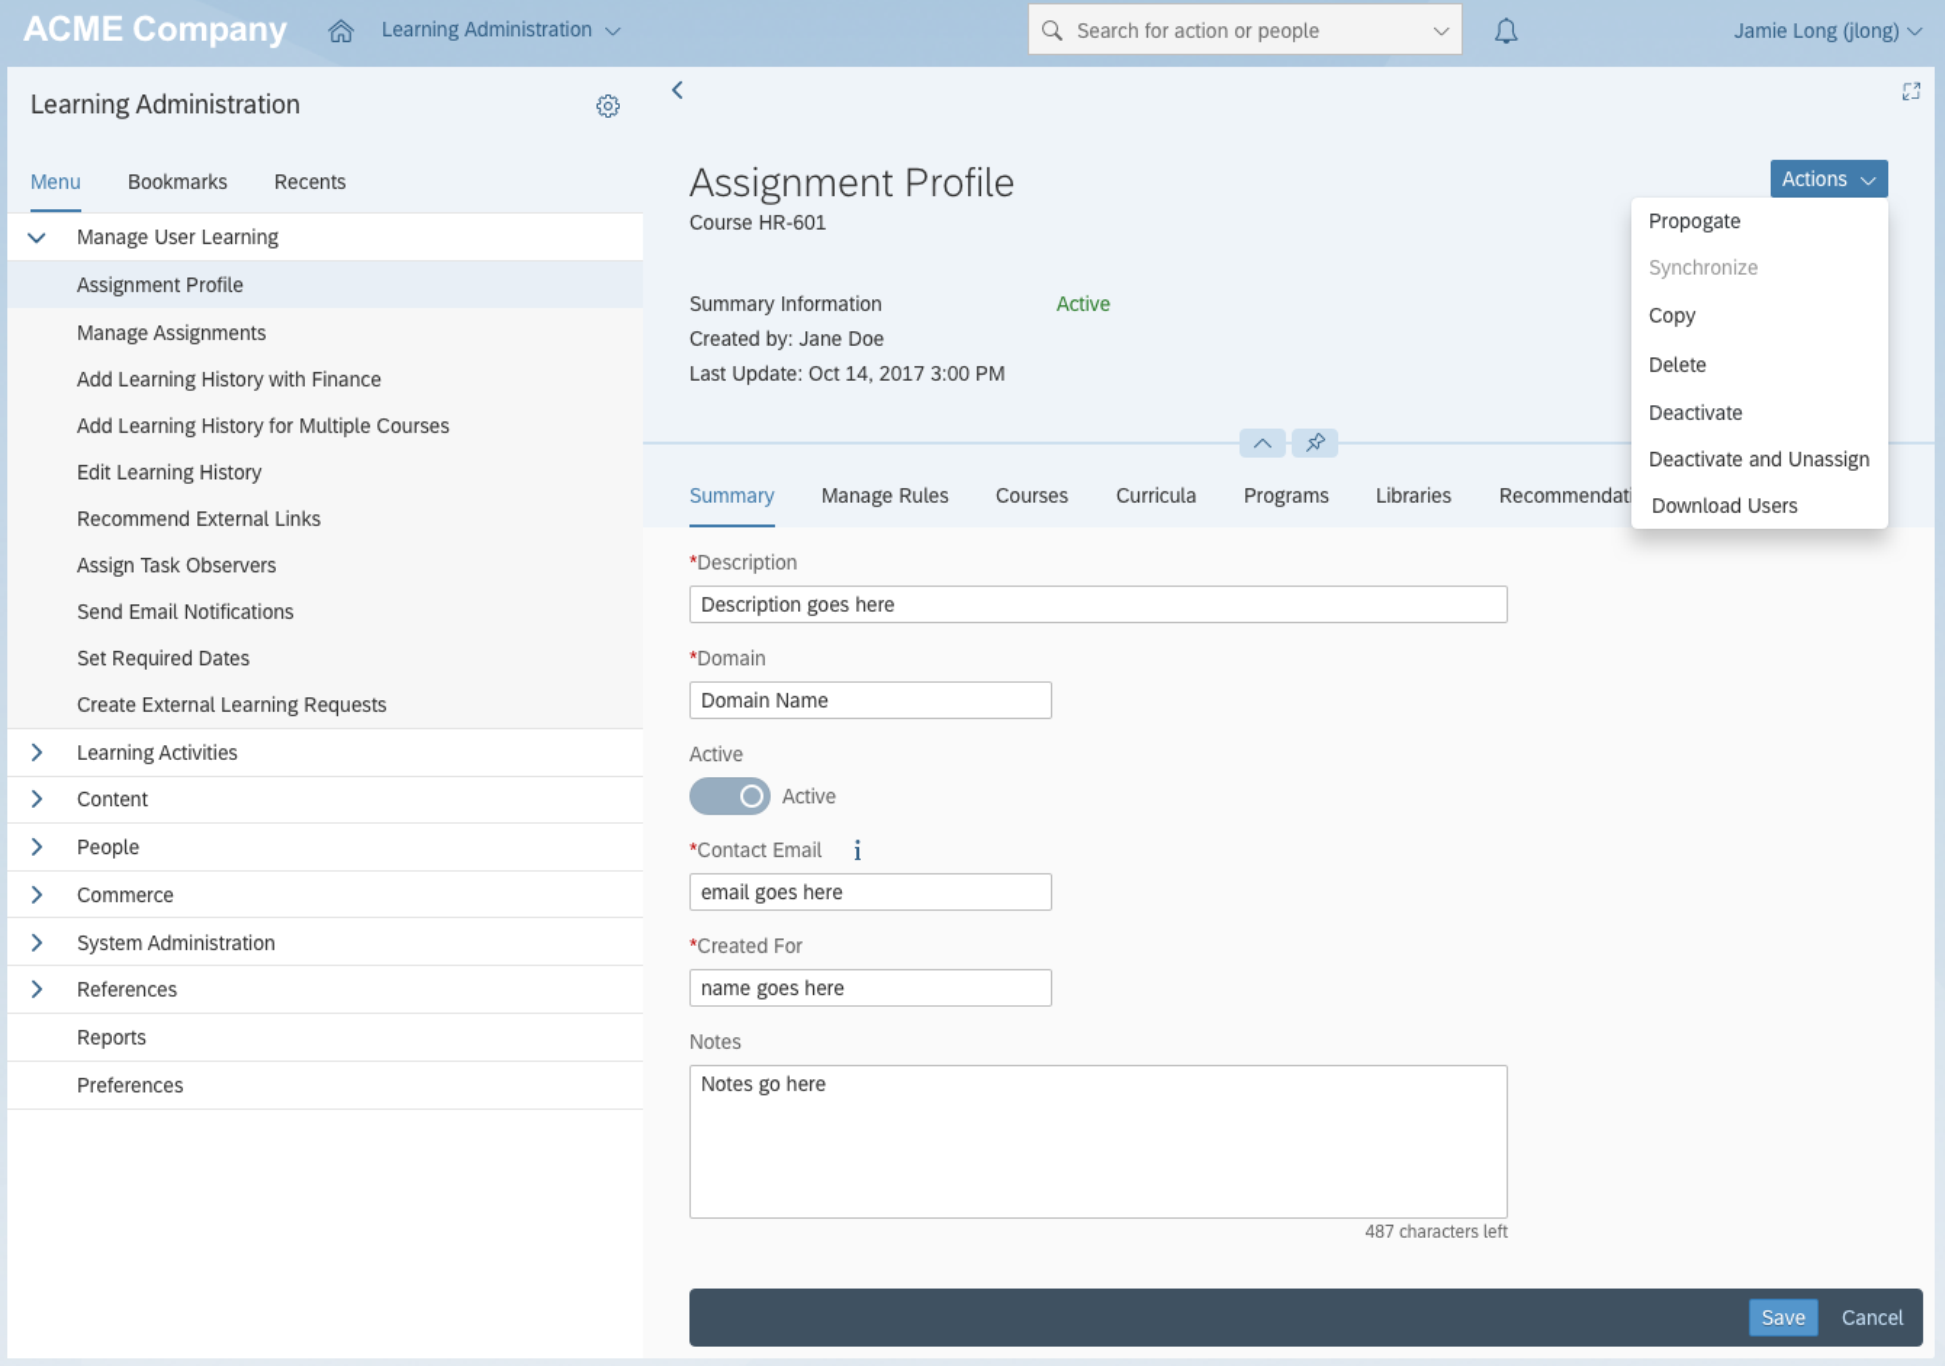 Preview Screenshot from SAP